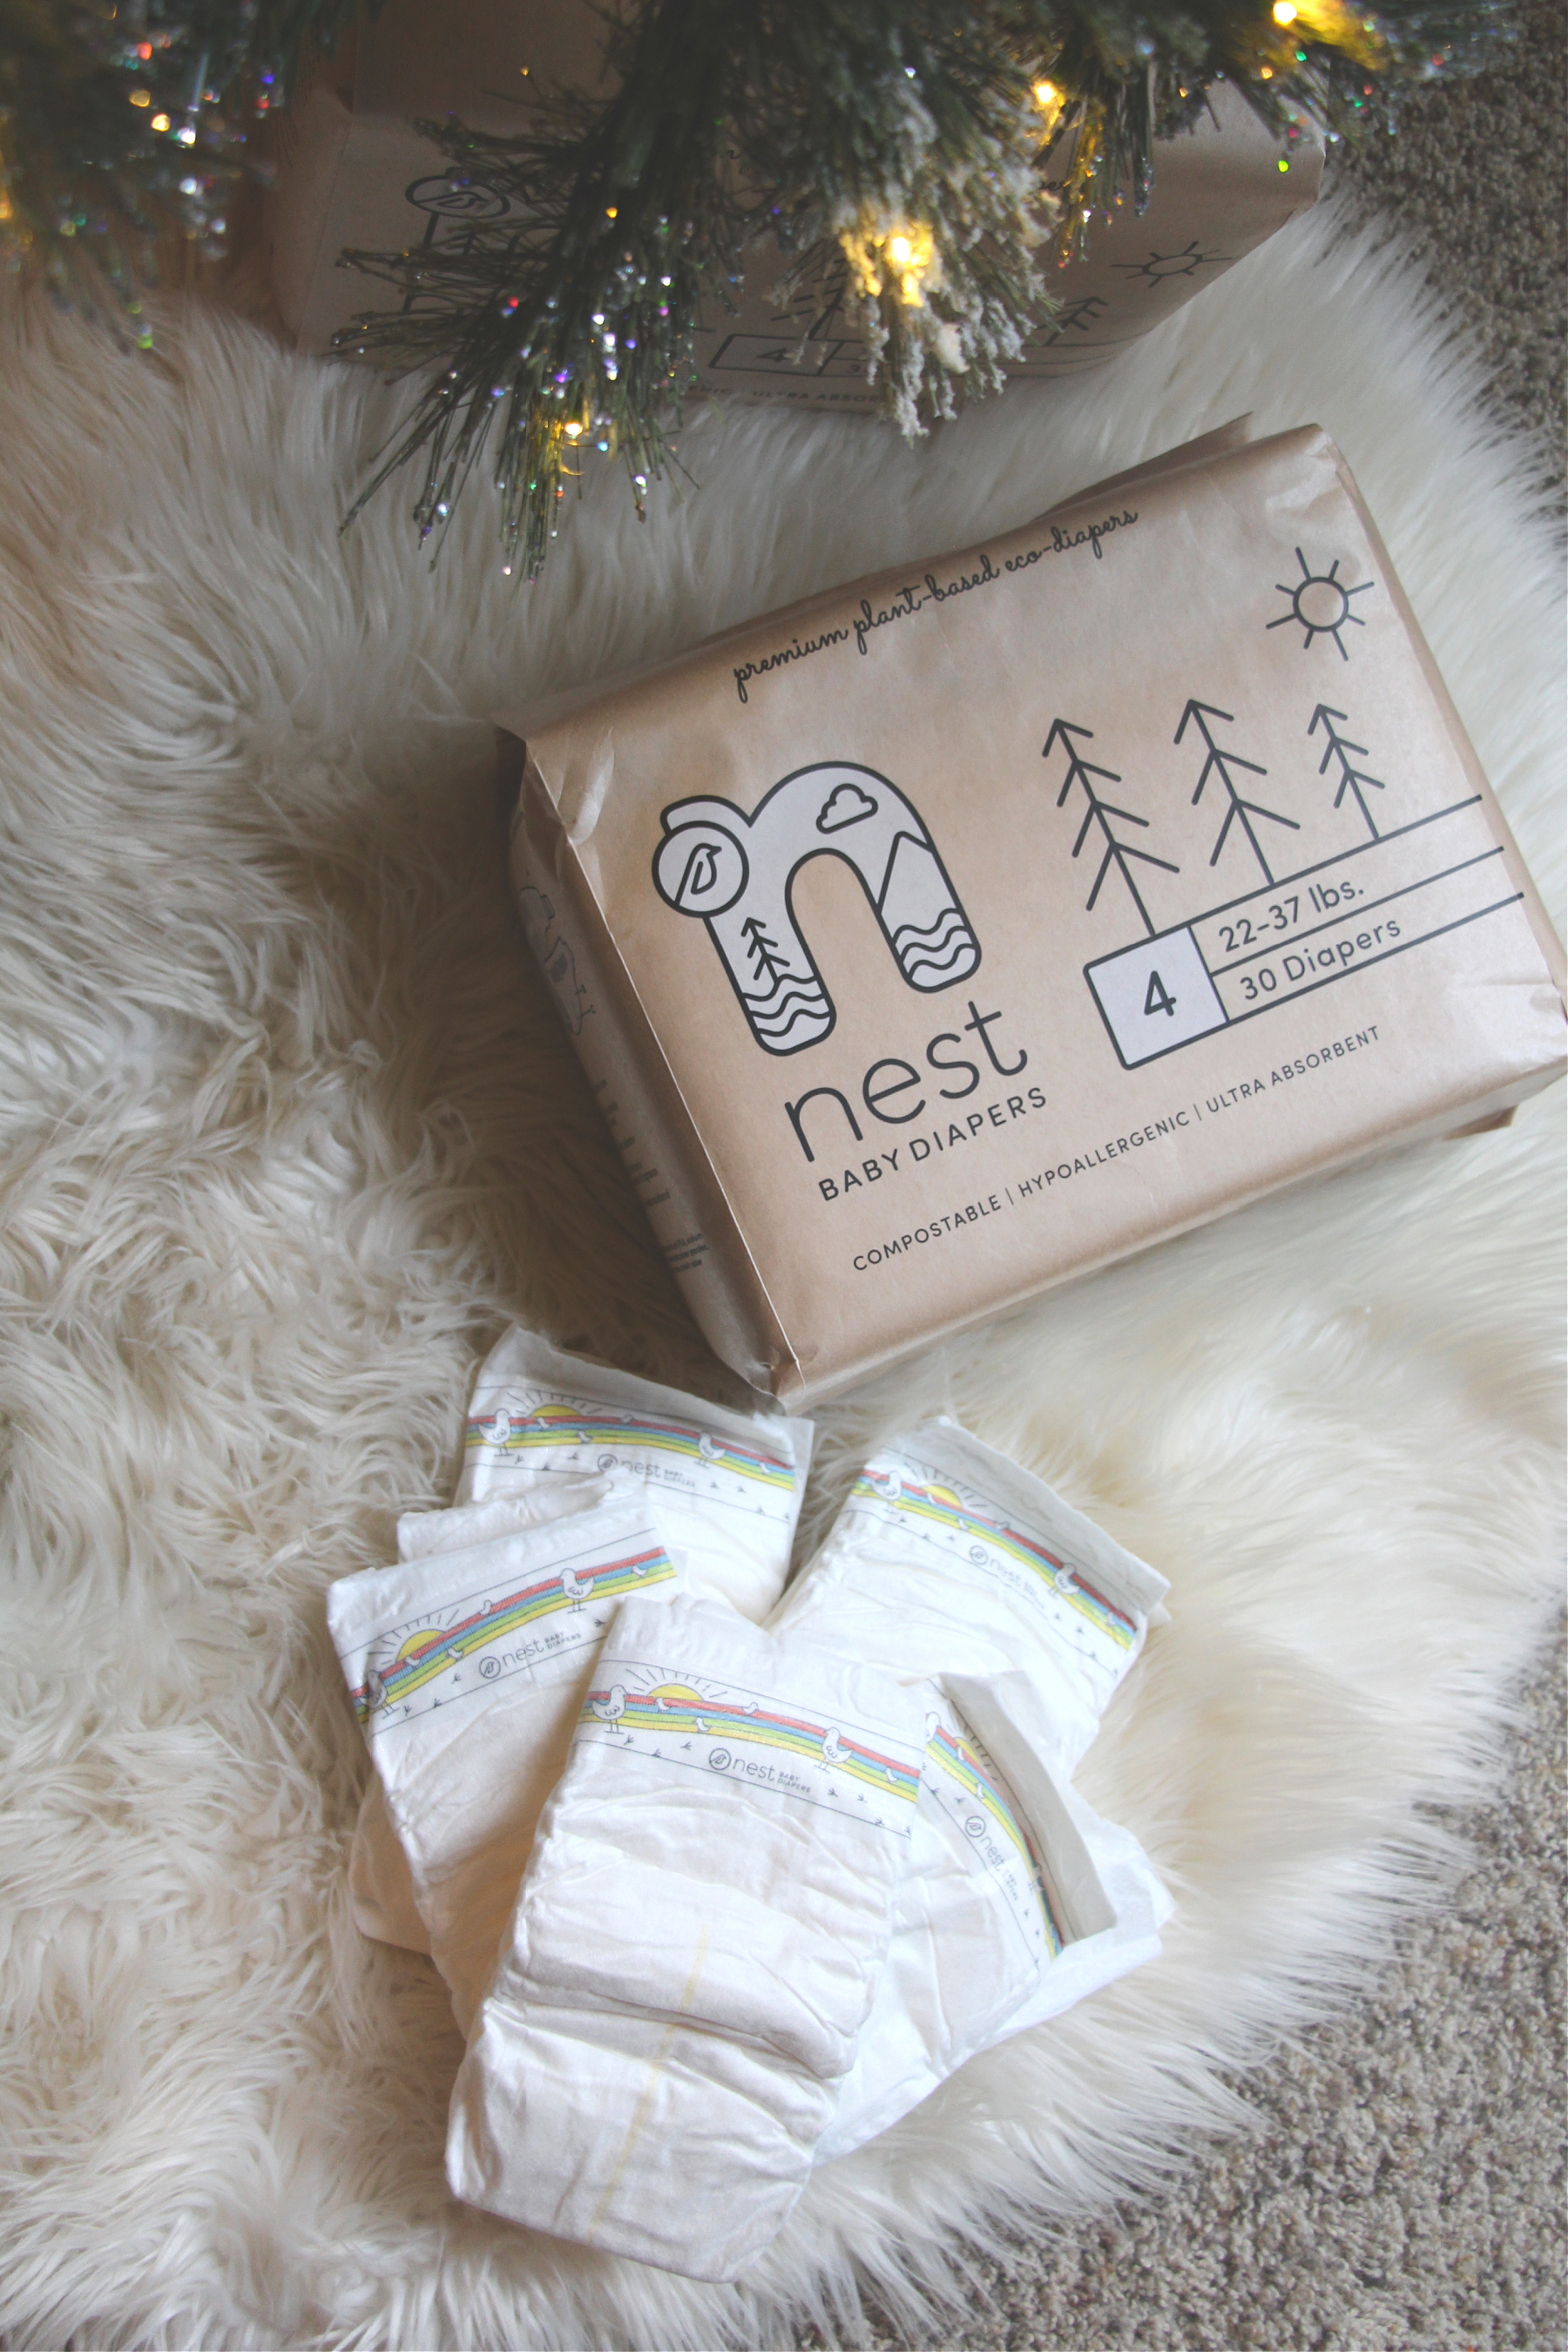 Say Hello To Nest Biodegradable & Compostable Diapers!